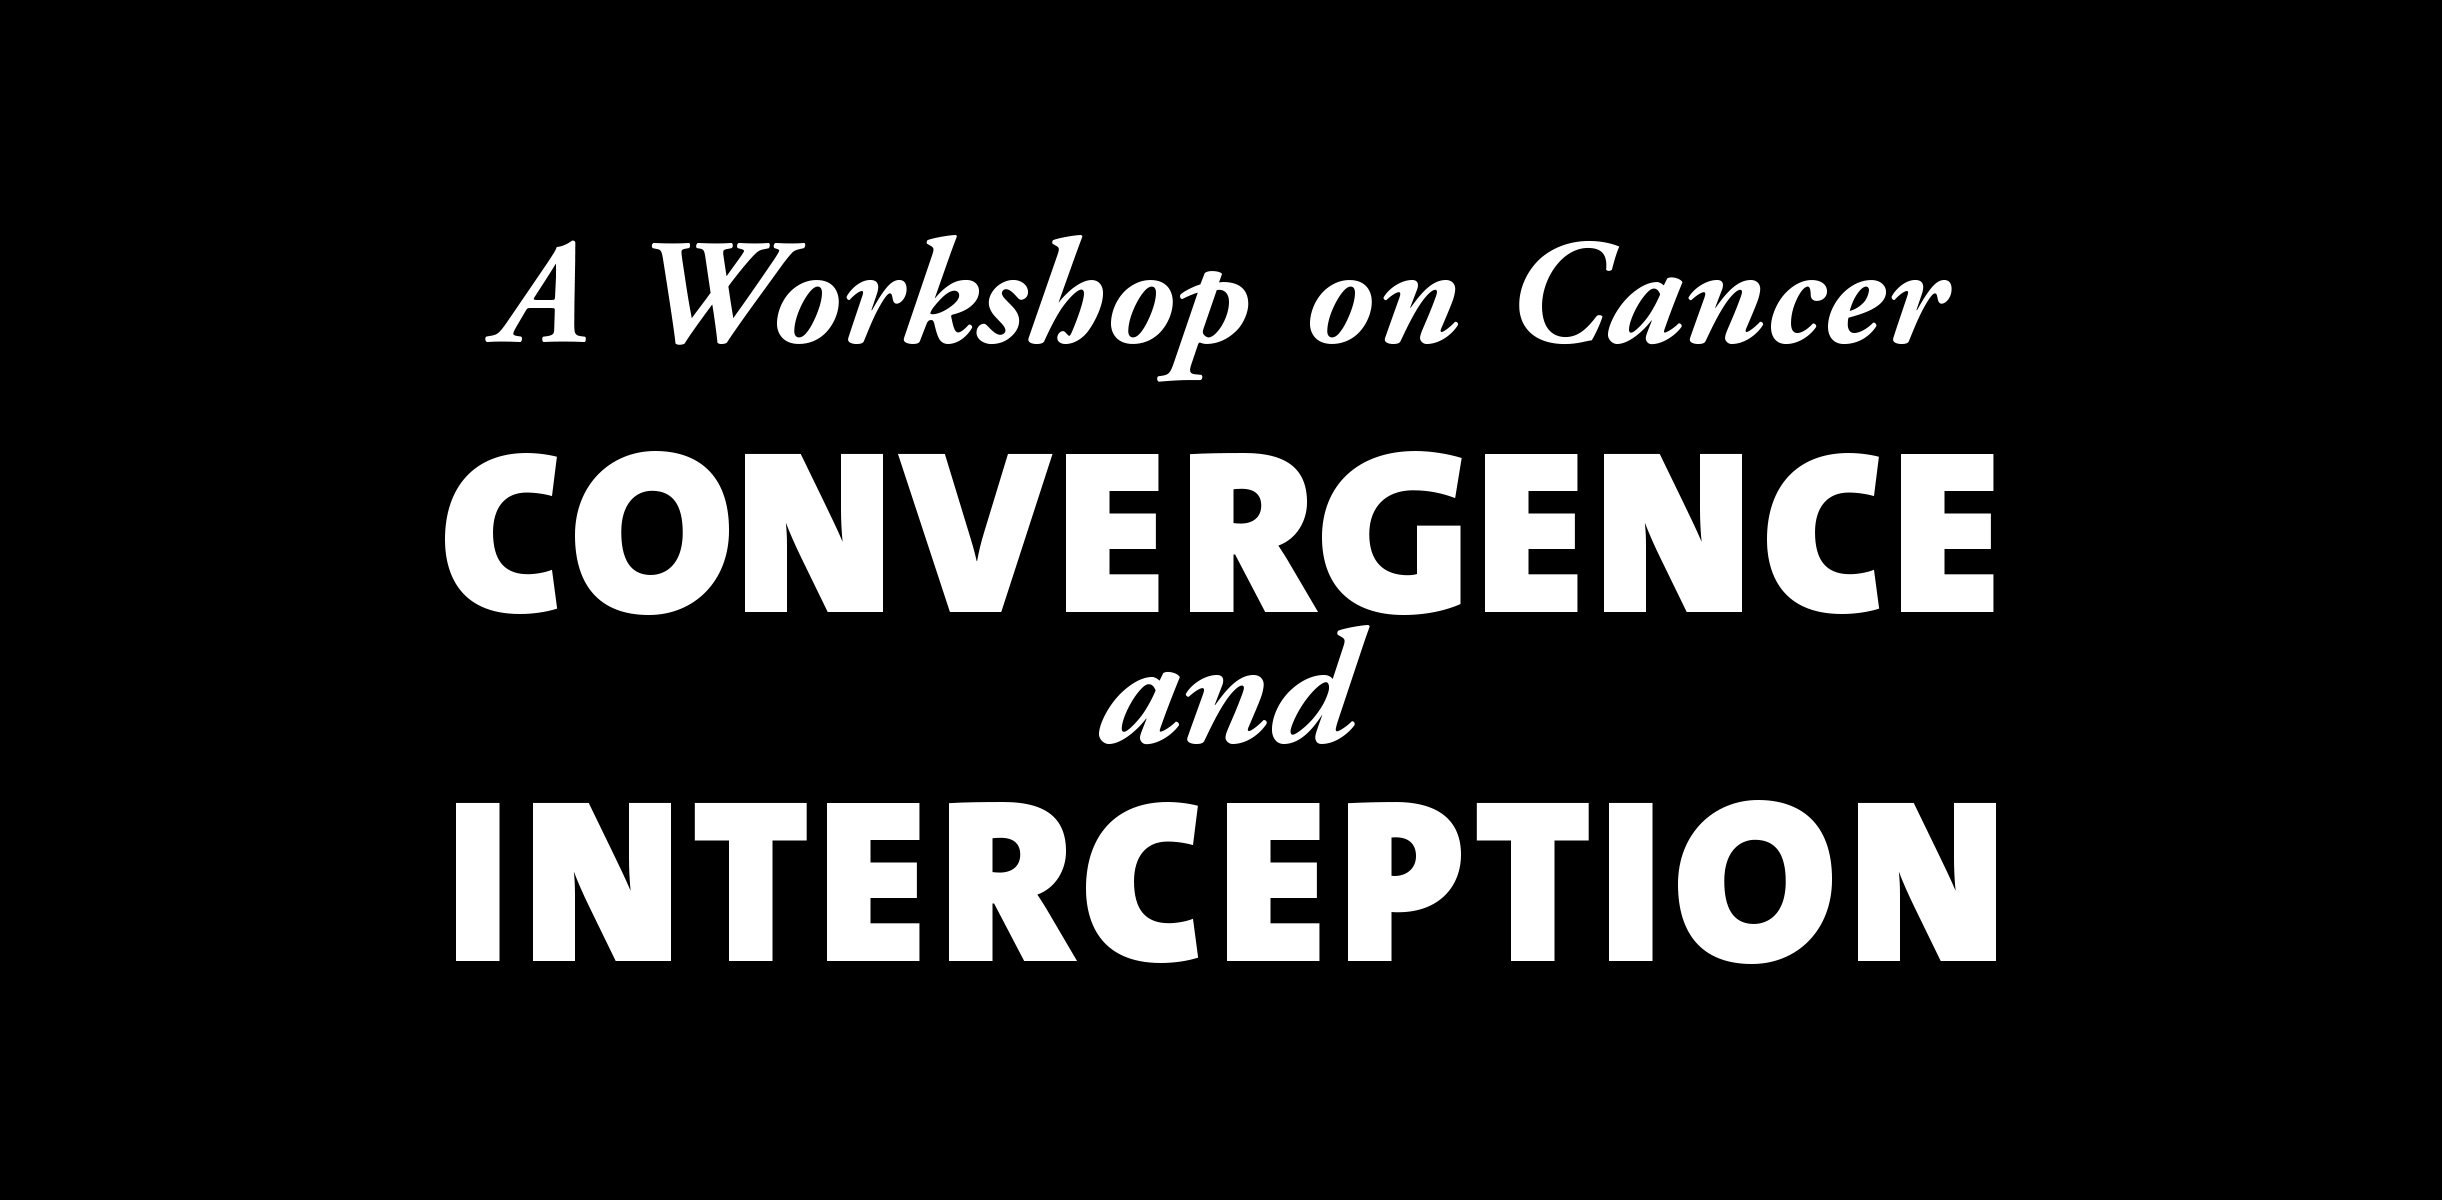 Virtual Meeting Logo for Academic Cancer Workshop – designed and produced by SP STUDIOS.